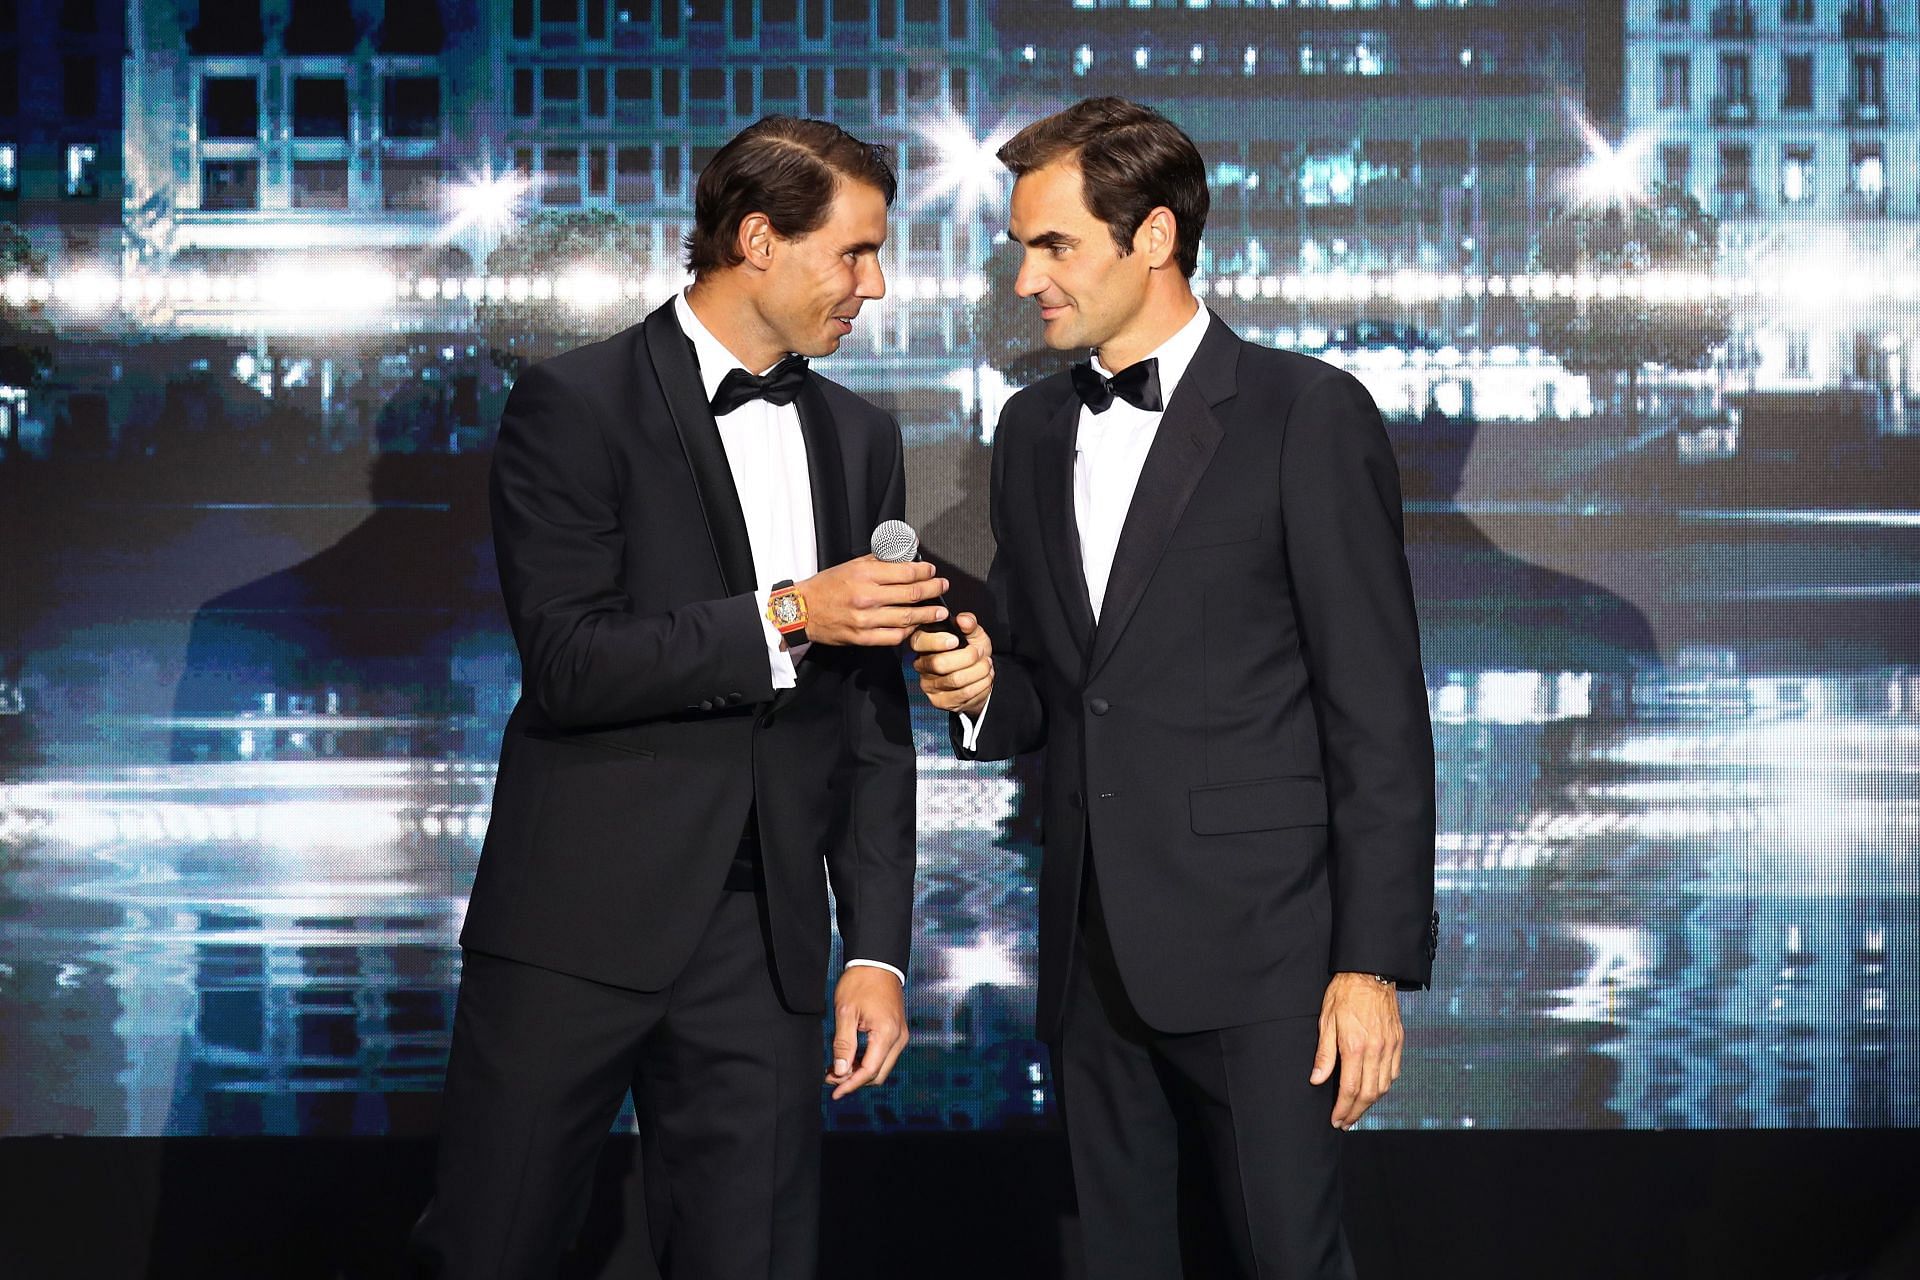 The &ldquo;Fedal&rdquo; rivalry became the epitome of goodwill